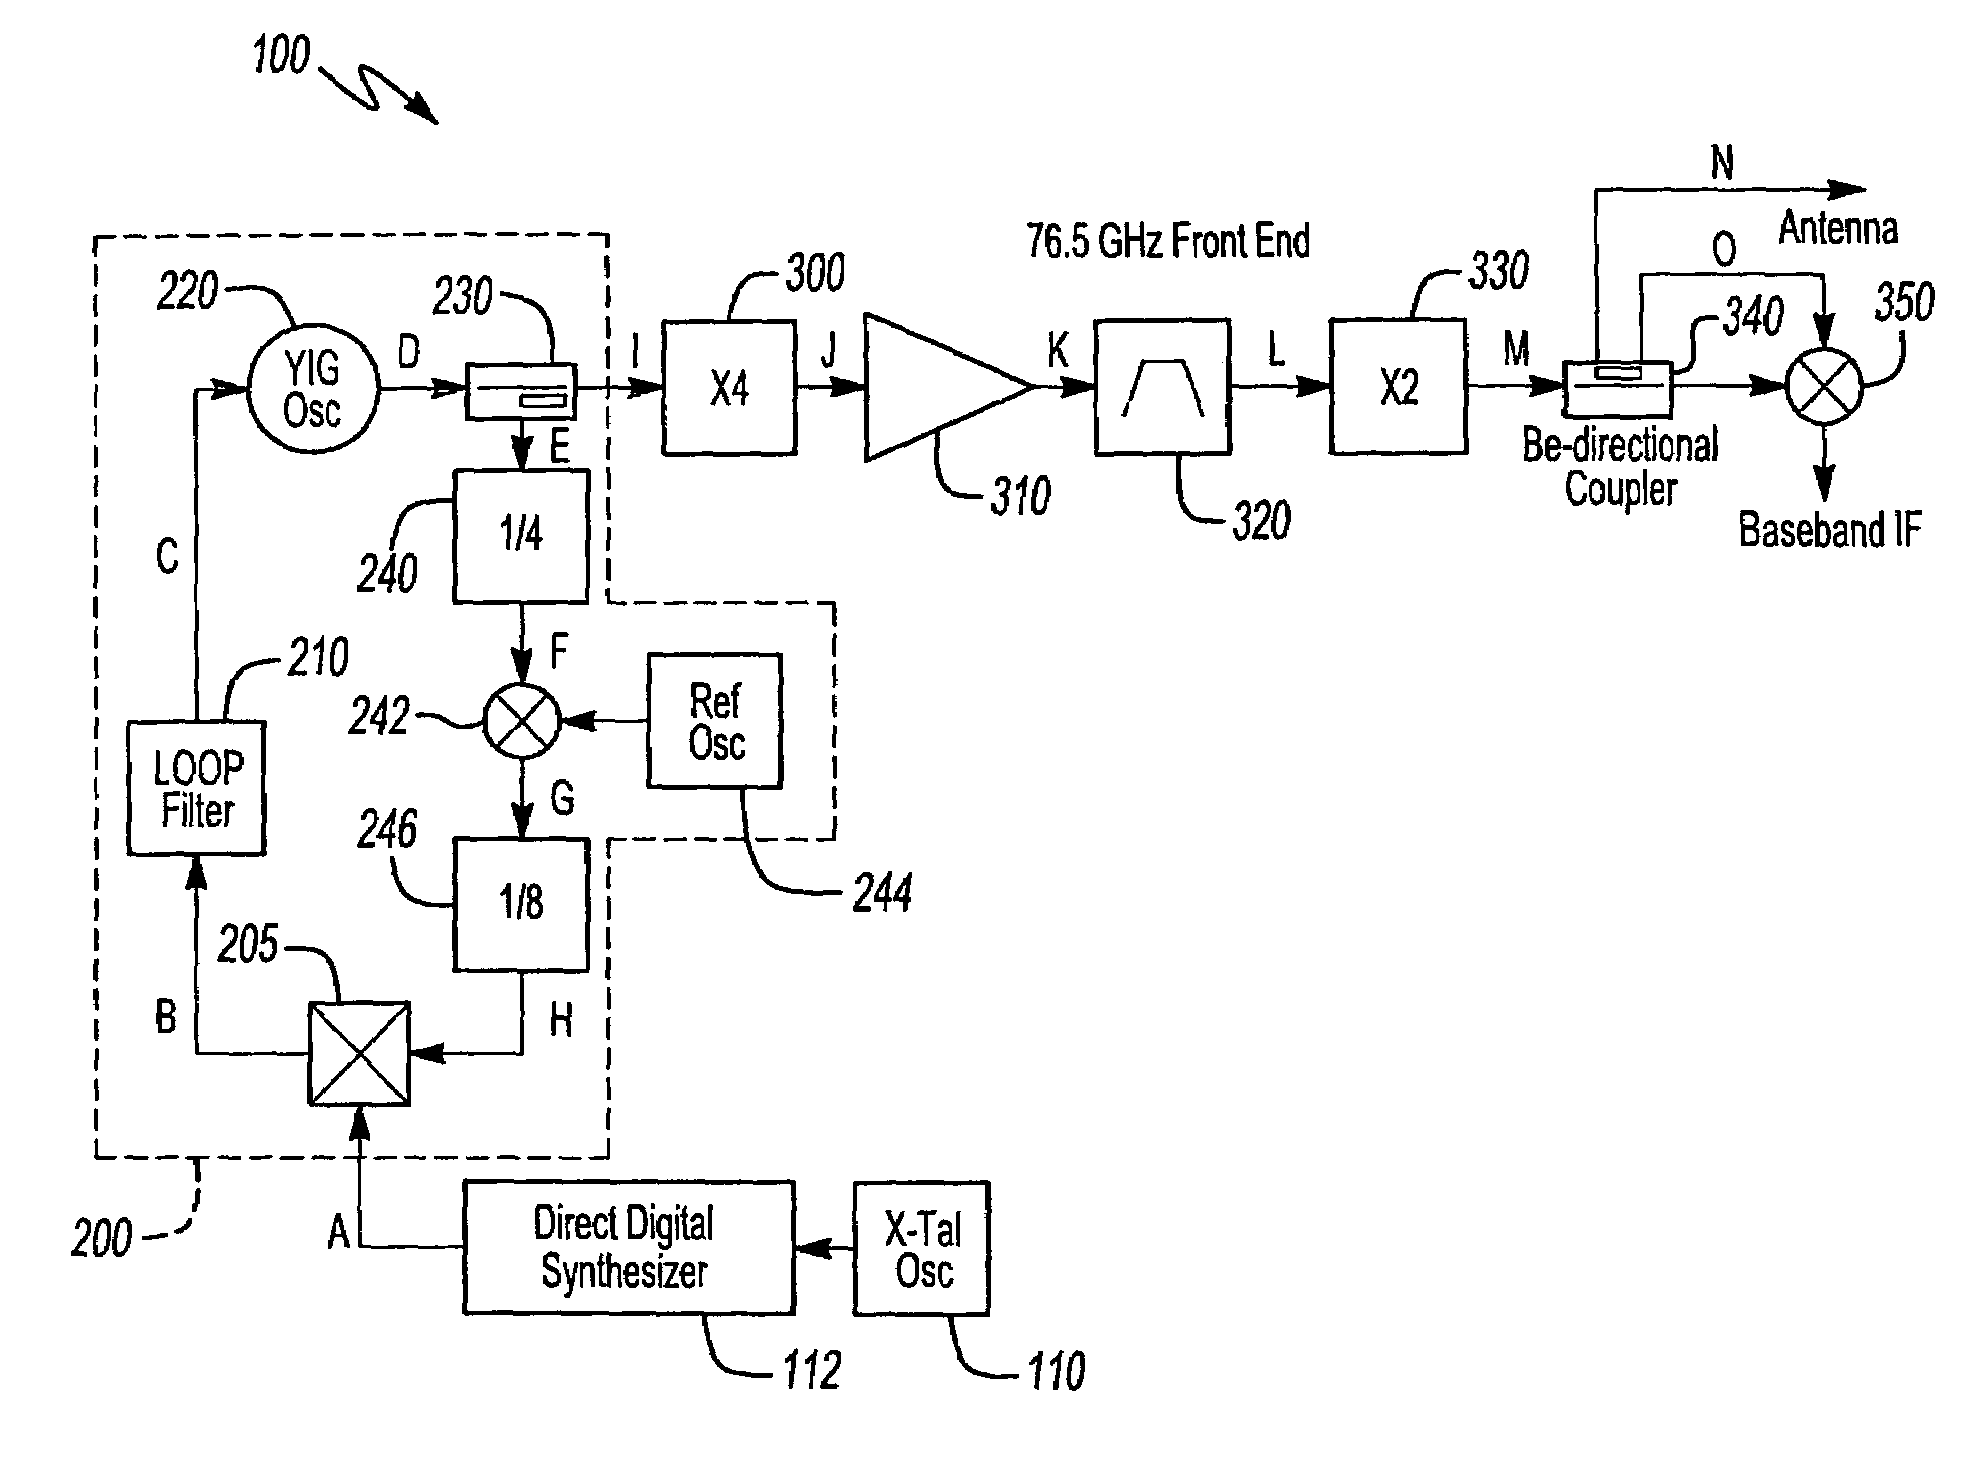 Radio frequency transceiver